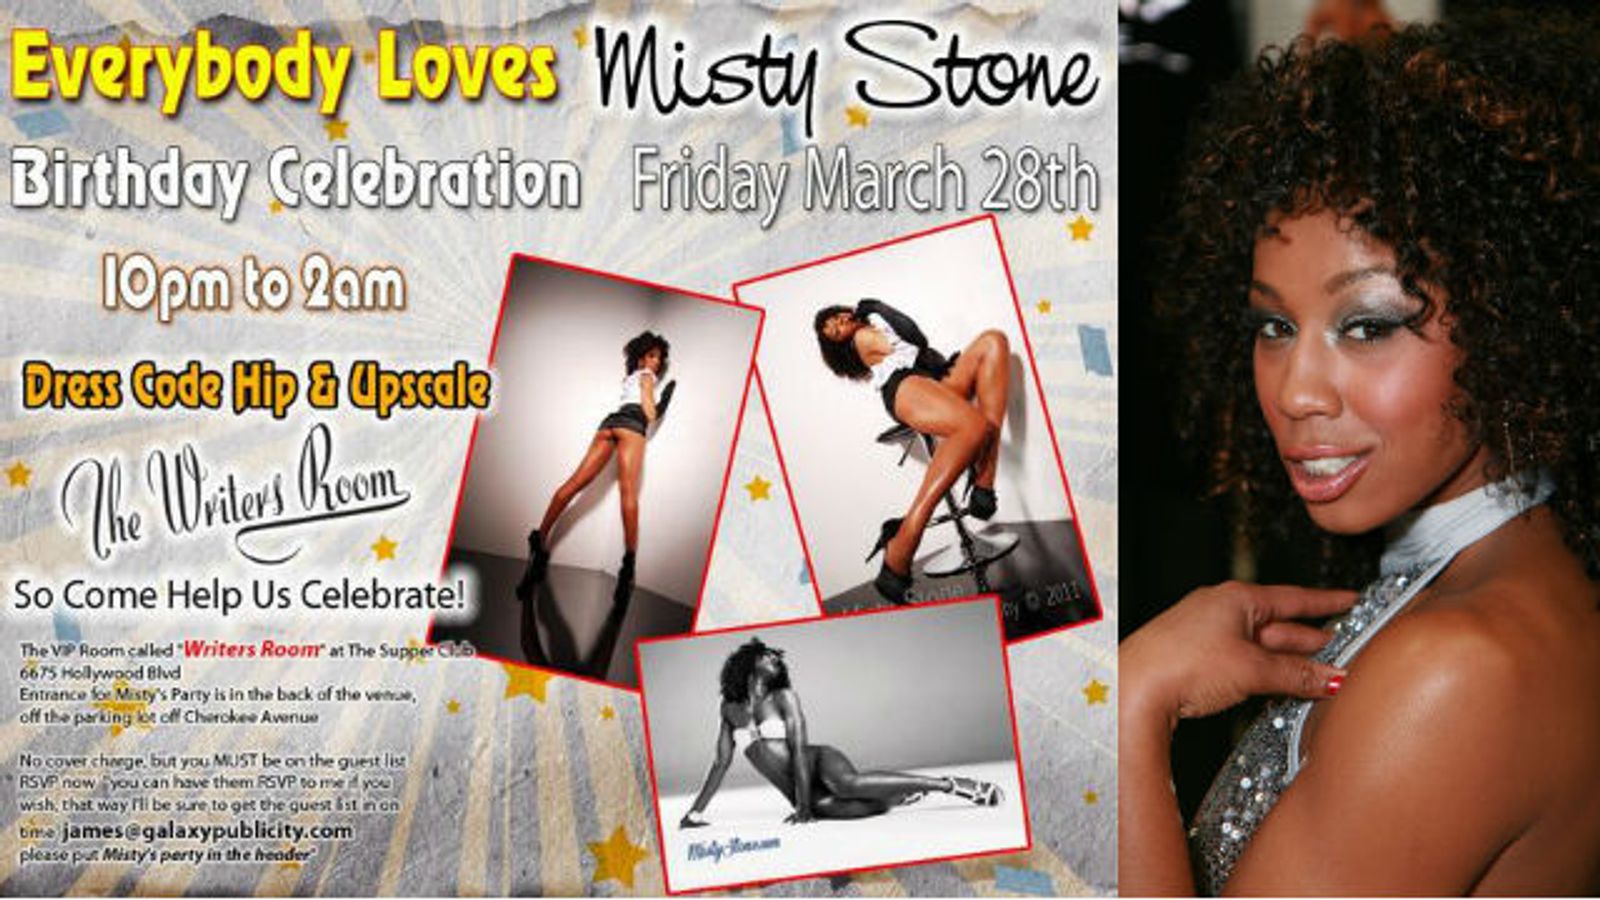 Misty Stone's Birthday Party is This Friday in Hollywood